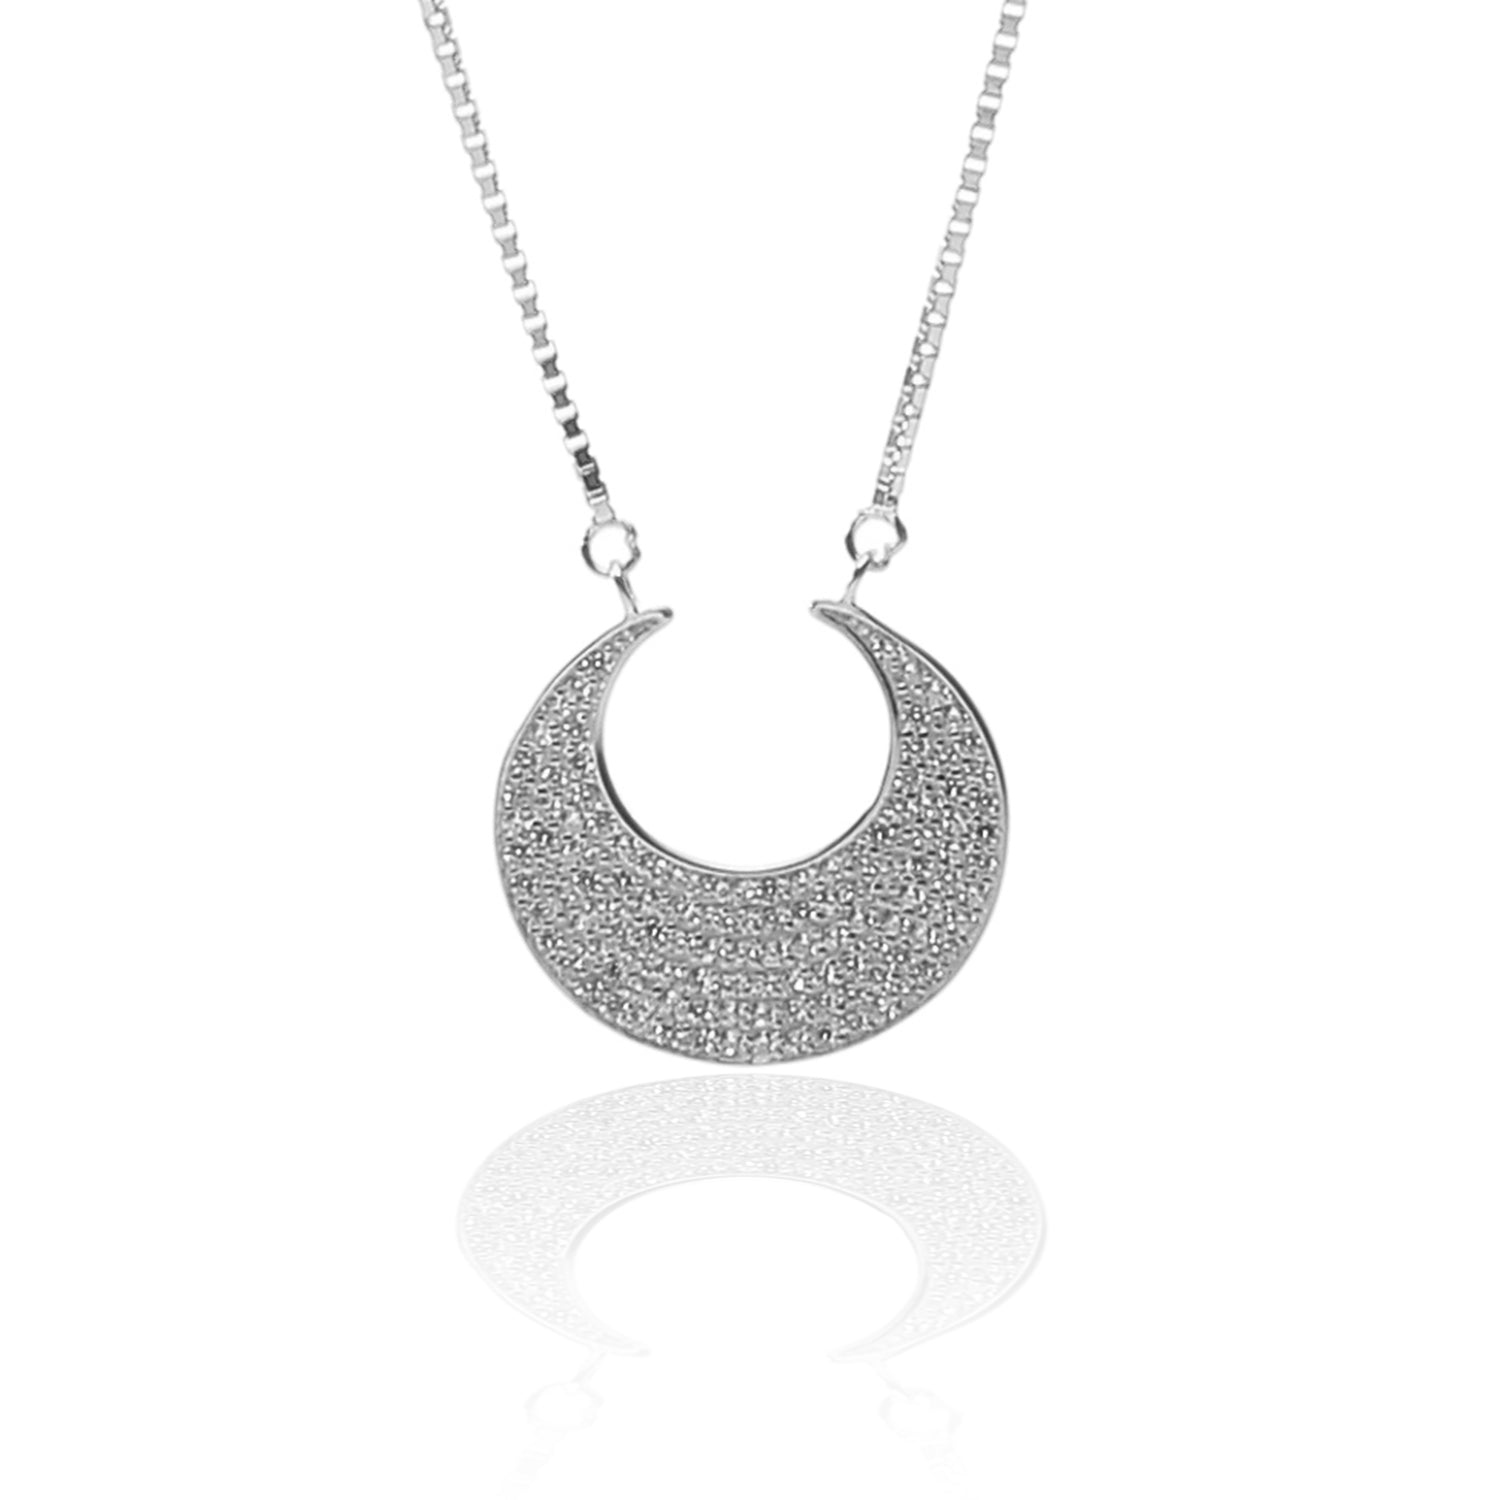 Crescent Moon Shaped Pendant Necklace and Earrings Set - ARJW1001RD ARCADIO